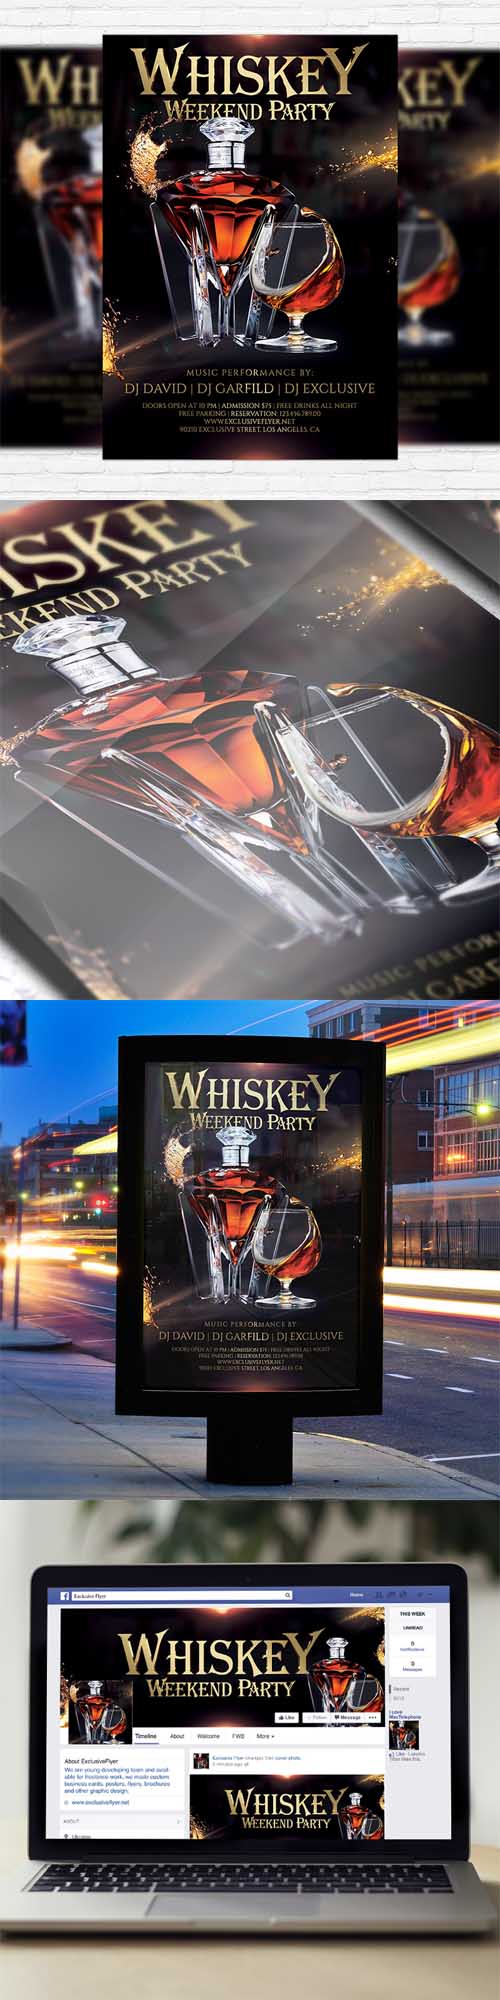 Flyer Template - Whiskey Weekend Party + Facebook Cover 5